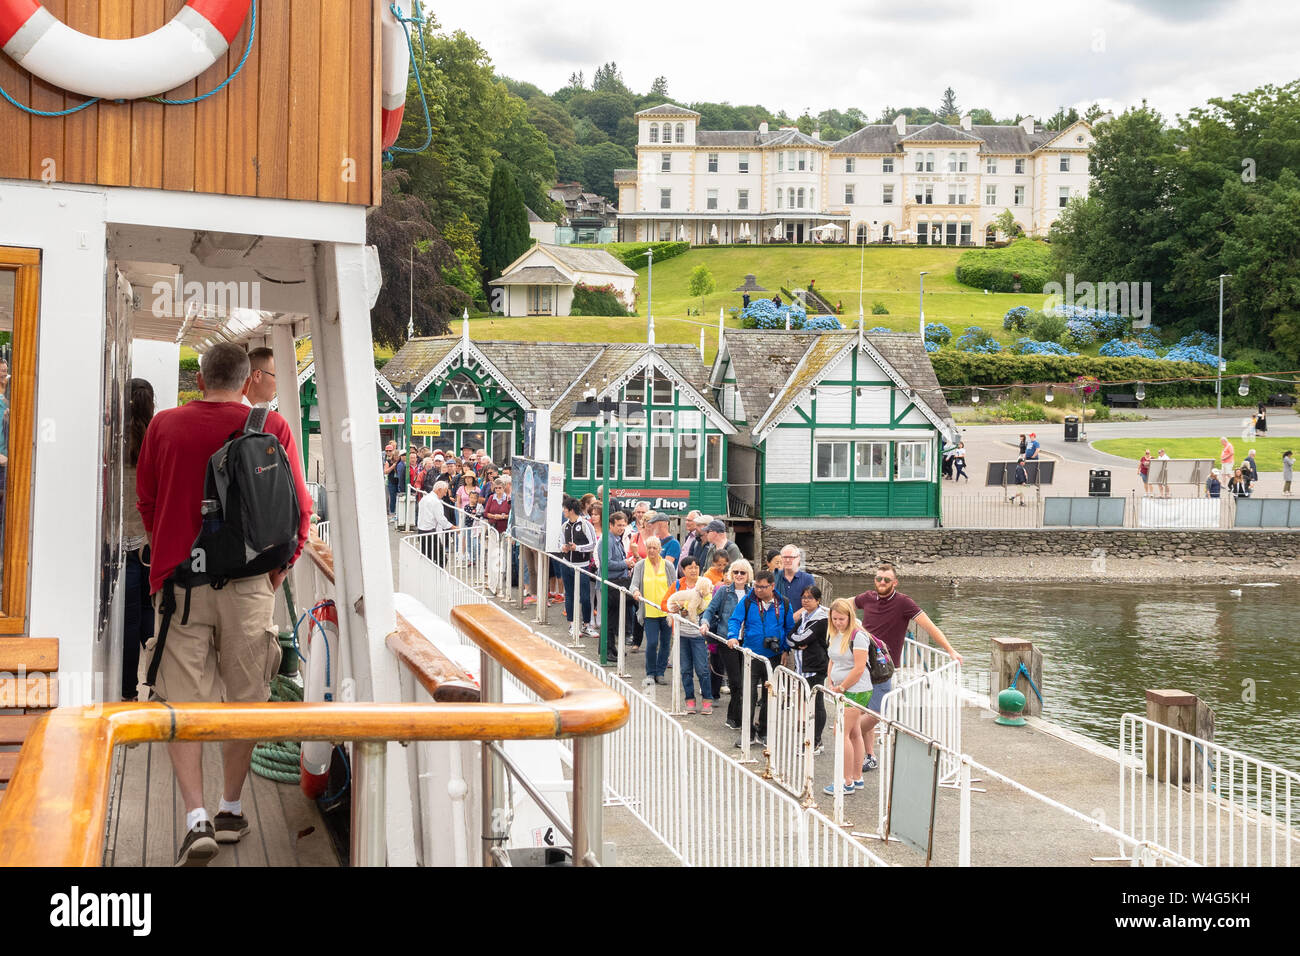 Bowness on Windermere - MV Teal steam cruiser arriving at Bowness Pier and passengers queuing on pier to board - Lake District, Cumbria, England, UK Stock Photo